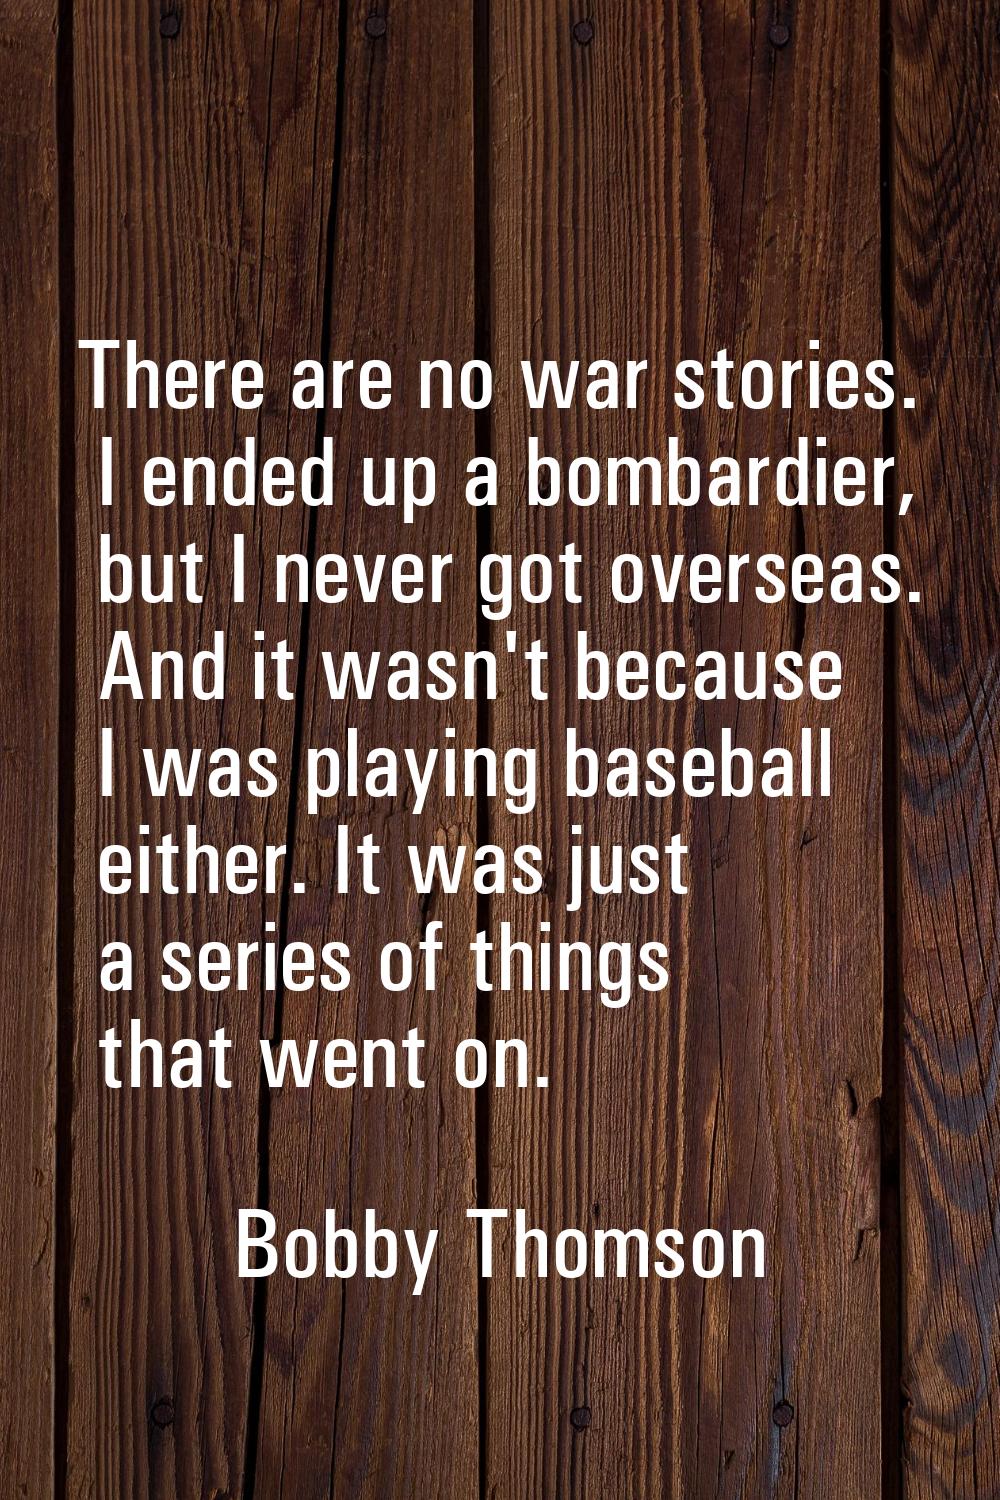 There are no war stories. I ended up a bombardier, but I never got overseas. And it wasn't because 